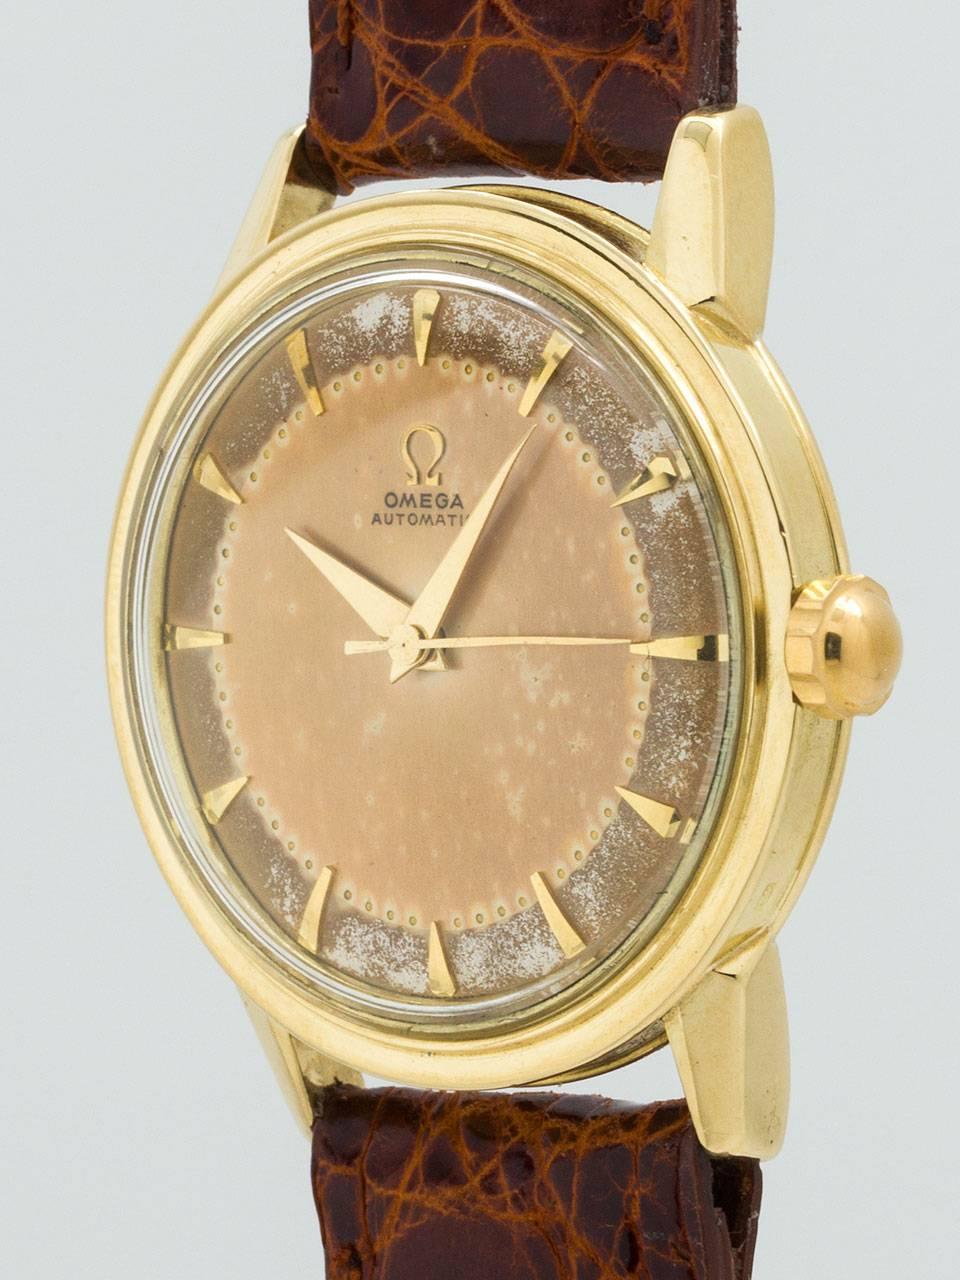 Omega Yellow Gold Automatic Wristwatch Ref 2736 SC In Excellent Condition For Sale In West Hollywood, CA